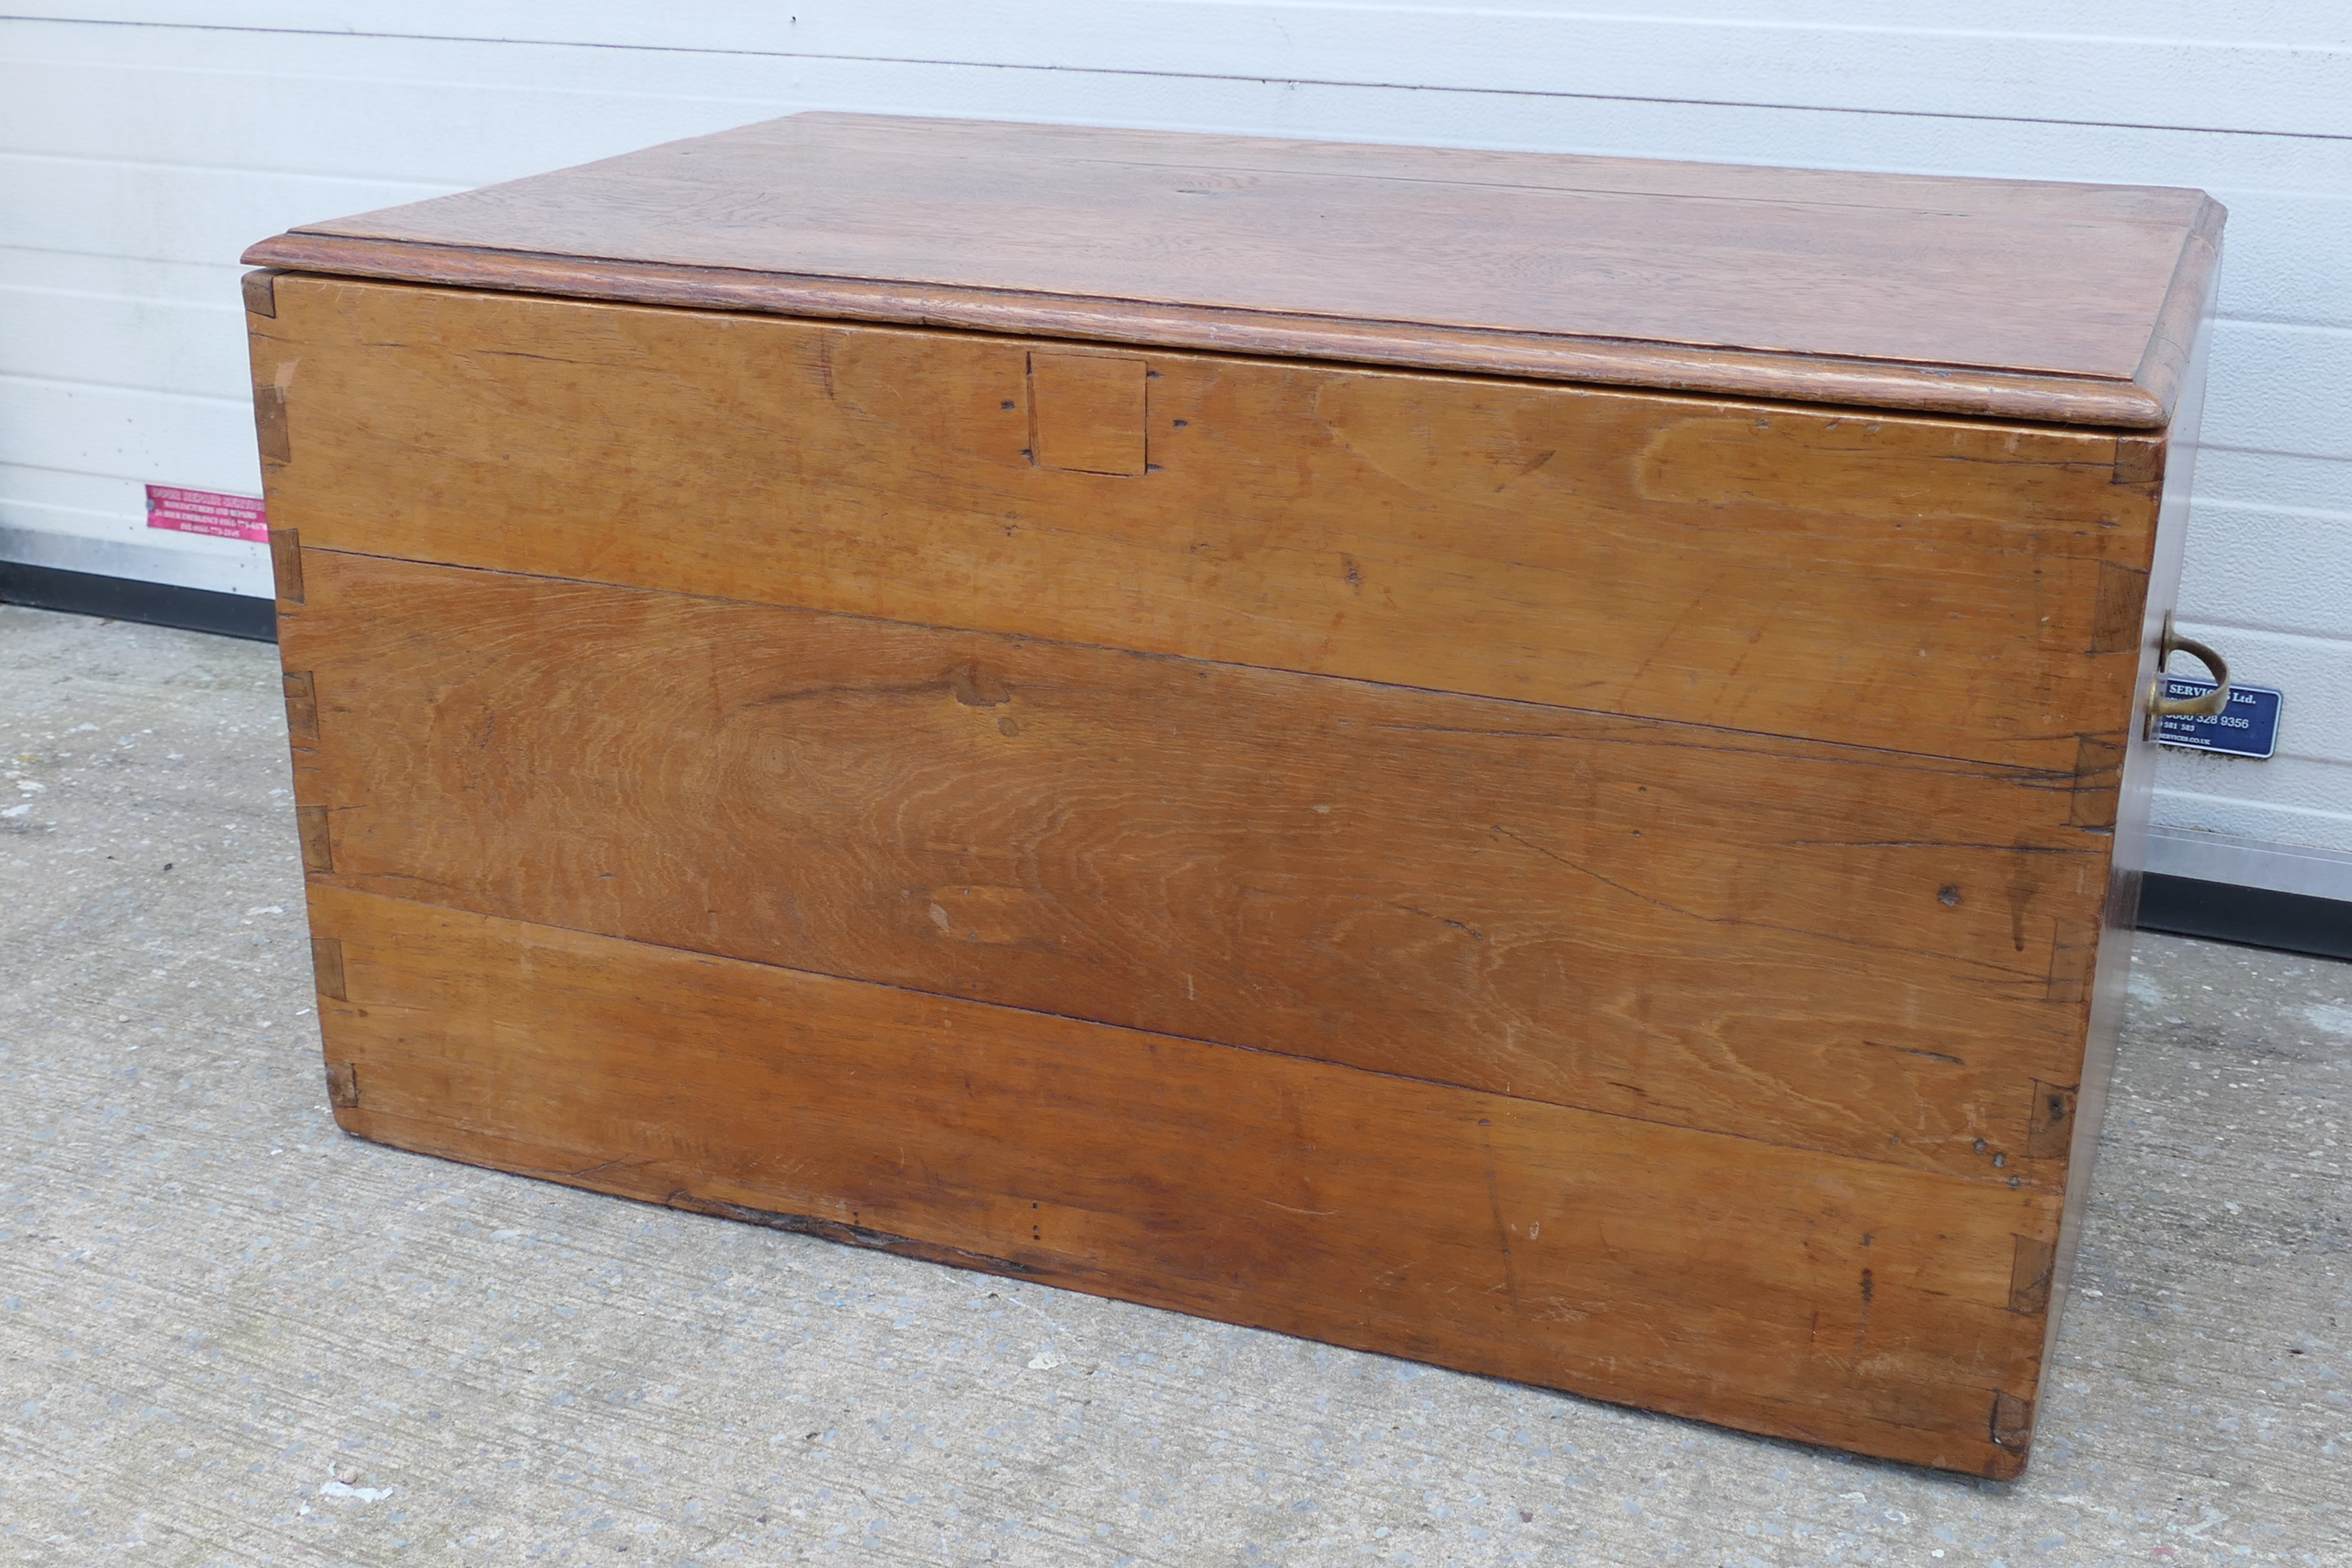 A blanket chest measuring approximately 54 cm x 99 cm x 60 cm. - Image 2 of 4